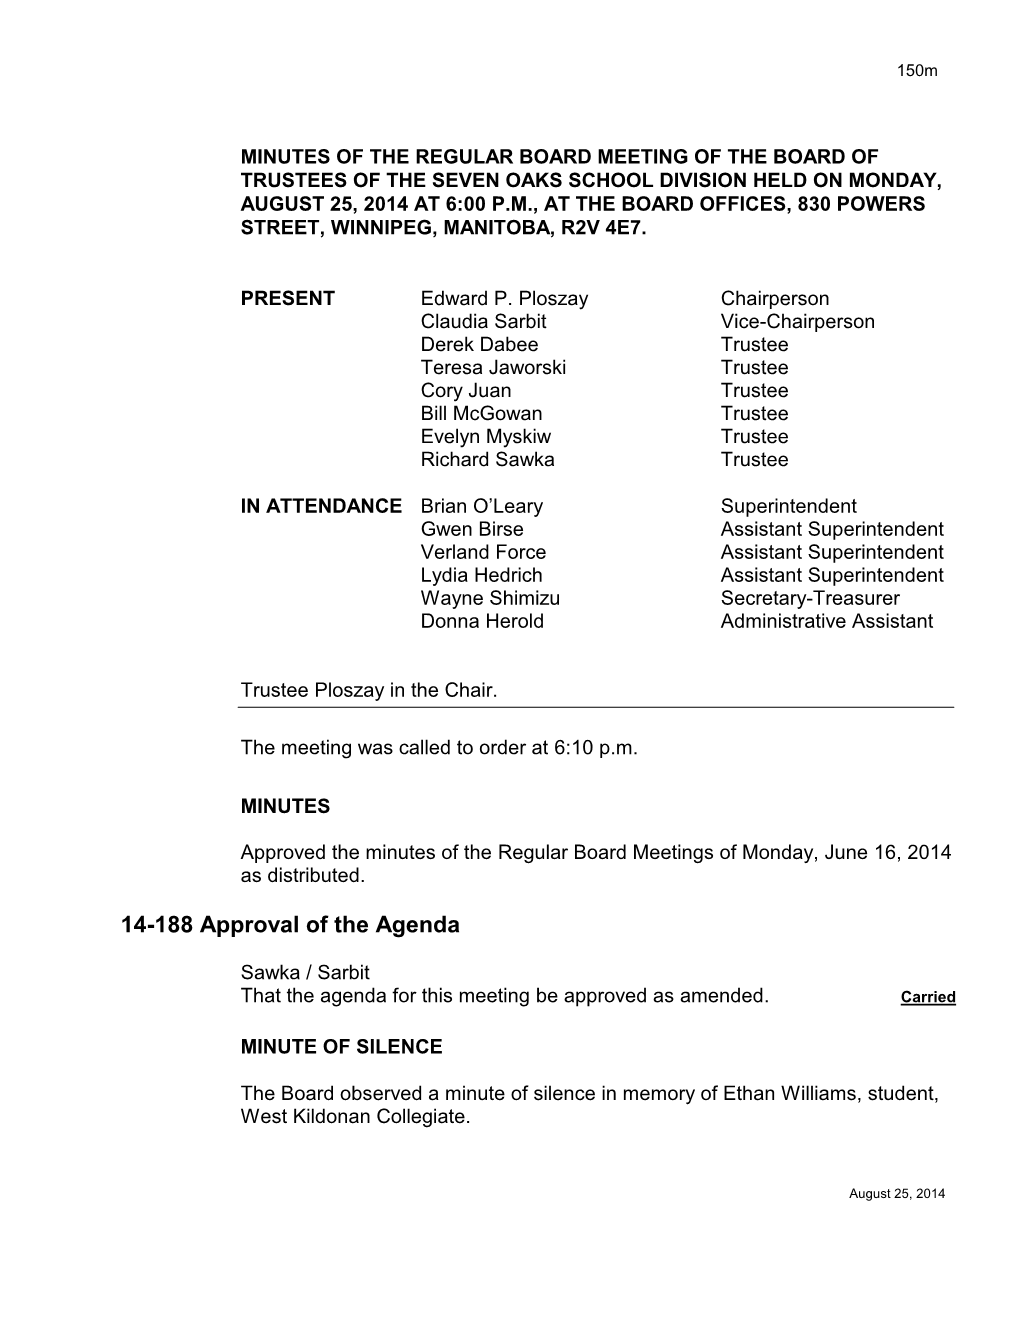 Minutes of the Regular Meeting of the Board of Trustees of the Seven Oaks School Division No